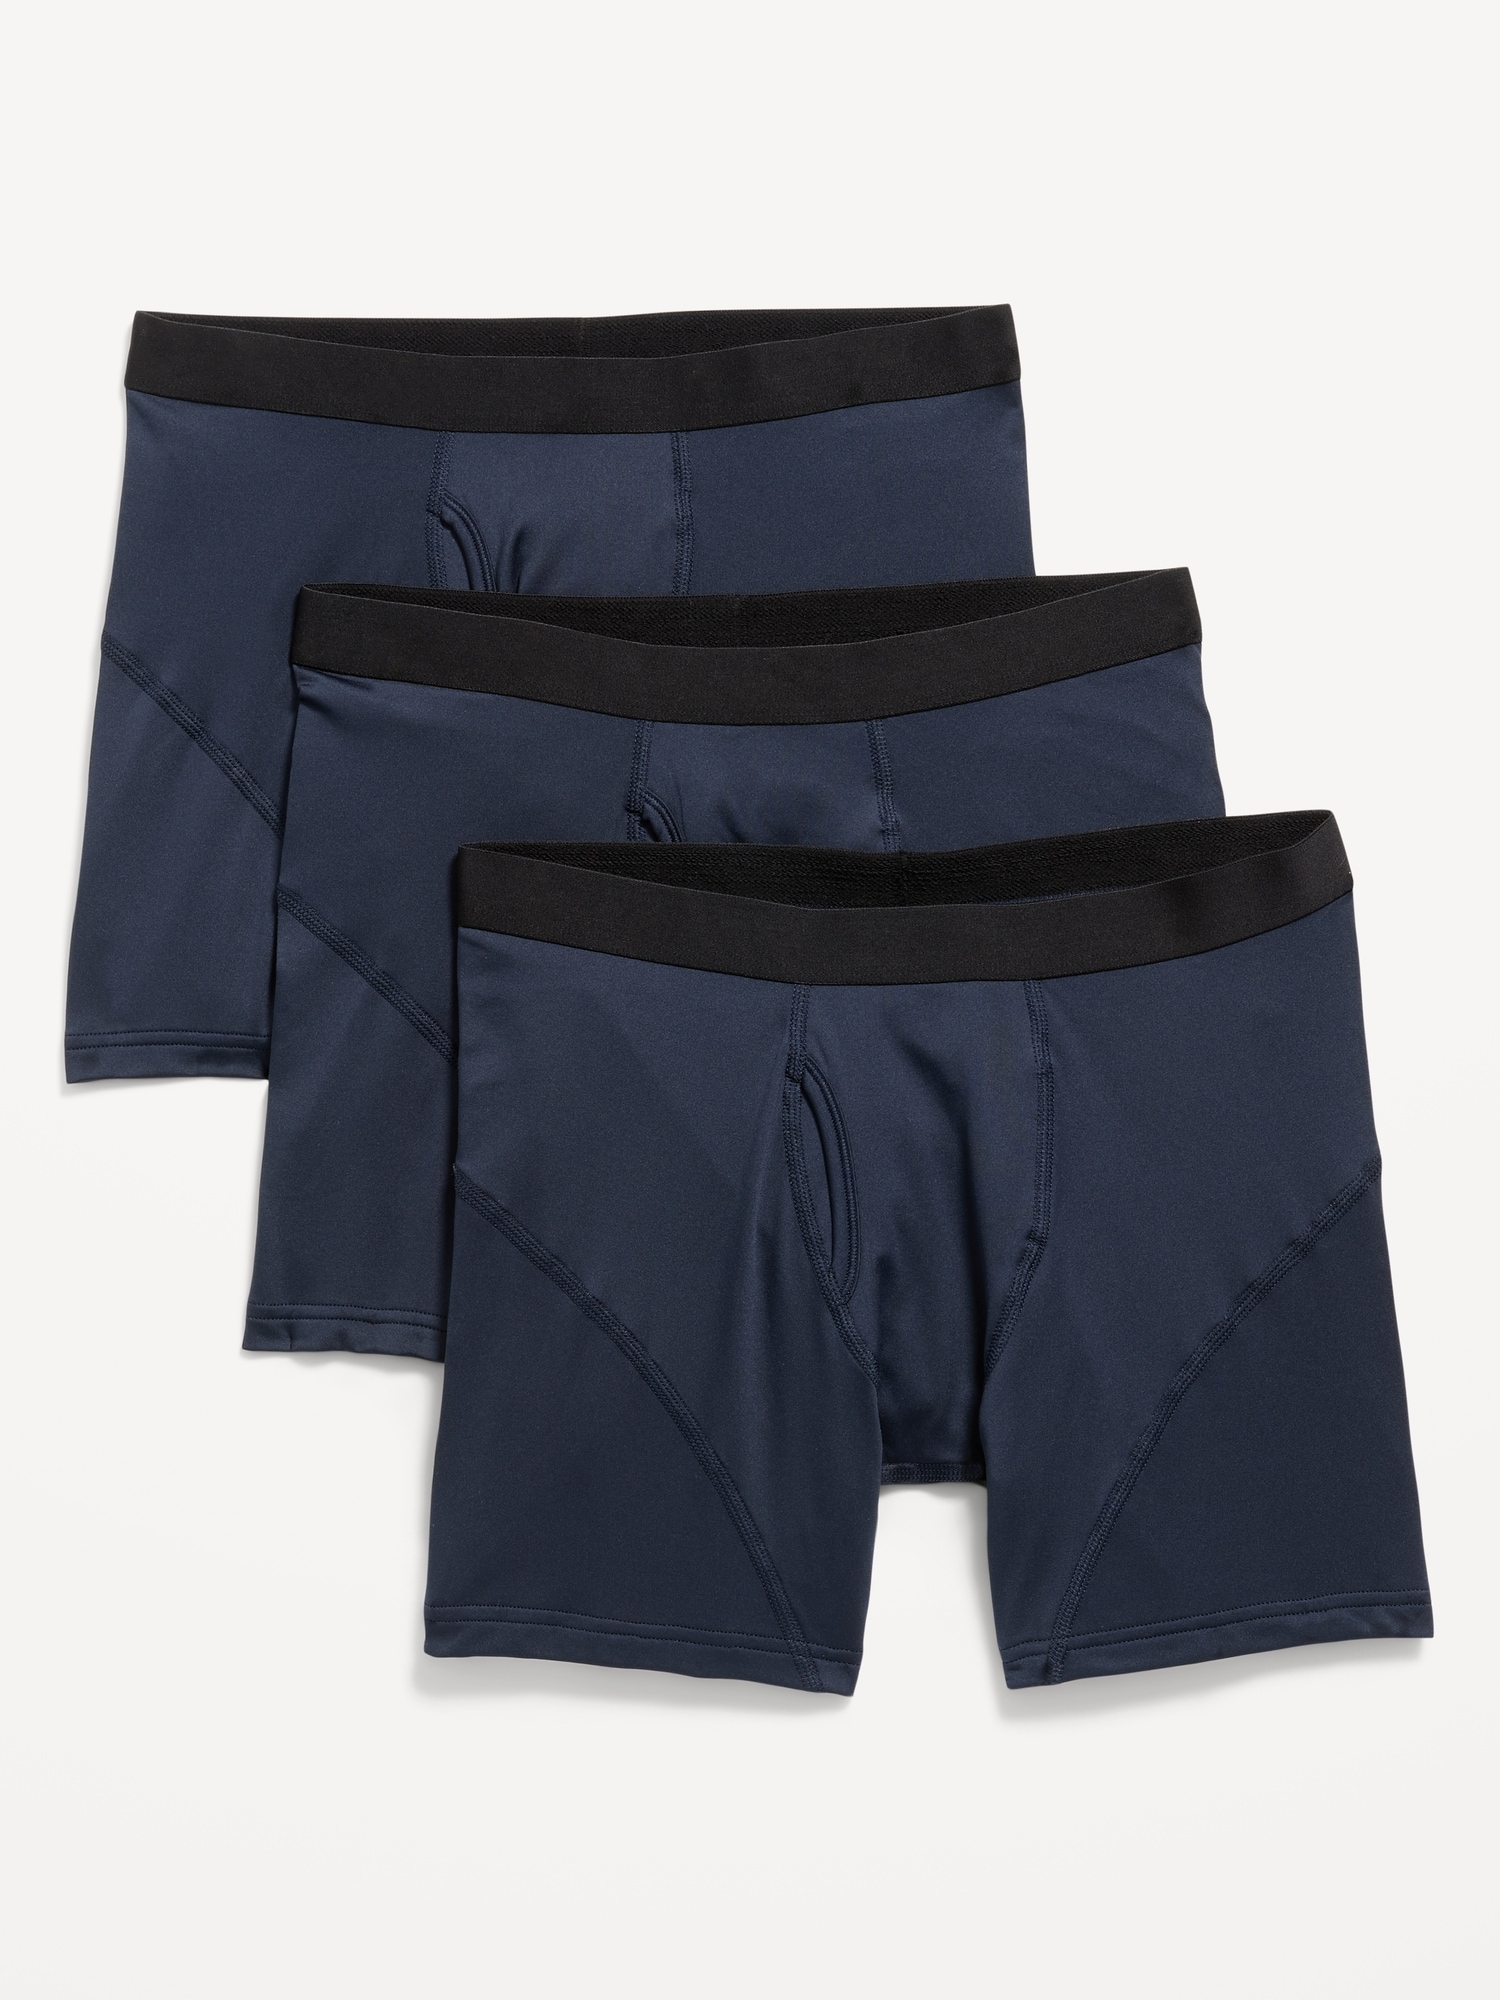 Old Navy Go-Dry Cool Performance Boxer-Briefs Underwear 3-Pack for Men -- 5-inch inseam blue. 1